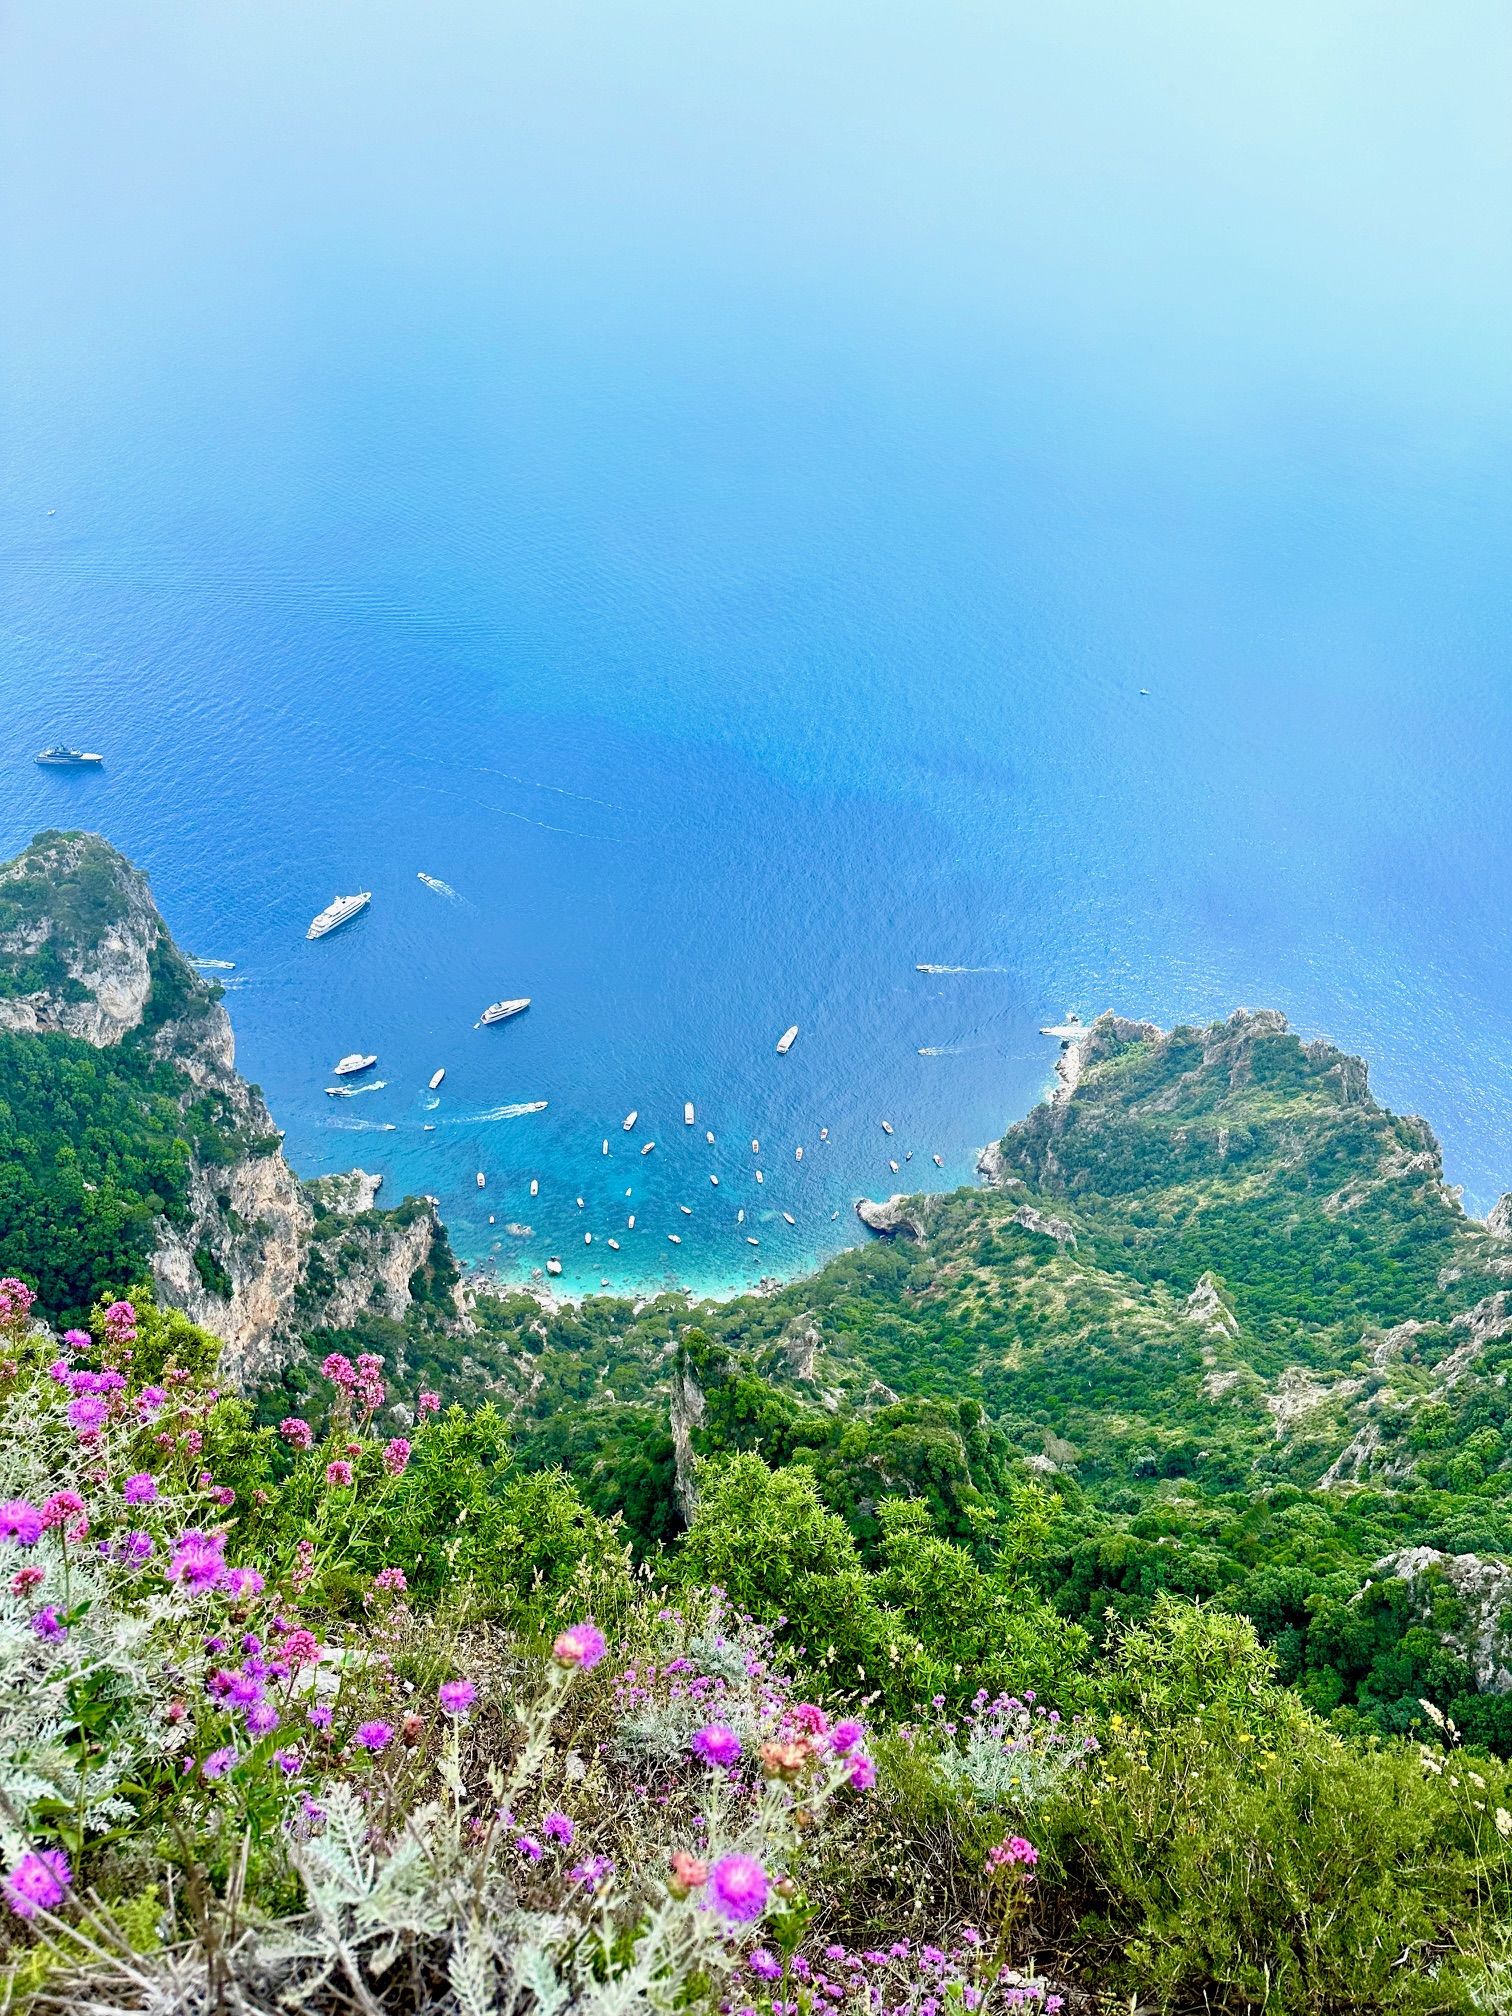 Ultimate Amalfi Coast Guide – Best Time to Visit the Amalfi Coast, Where to Stay, What to See